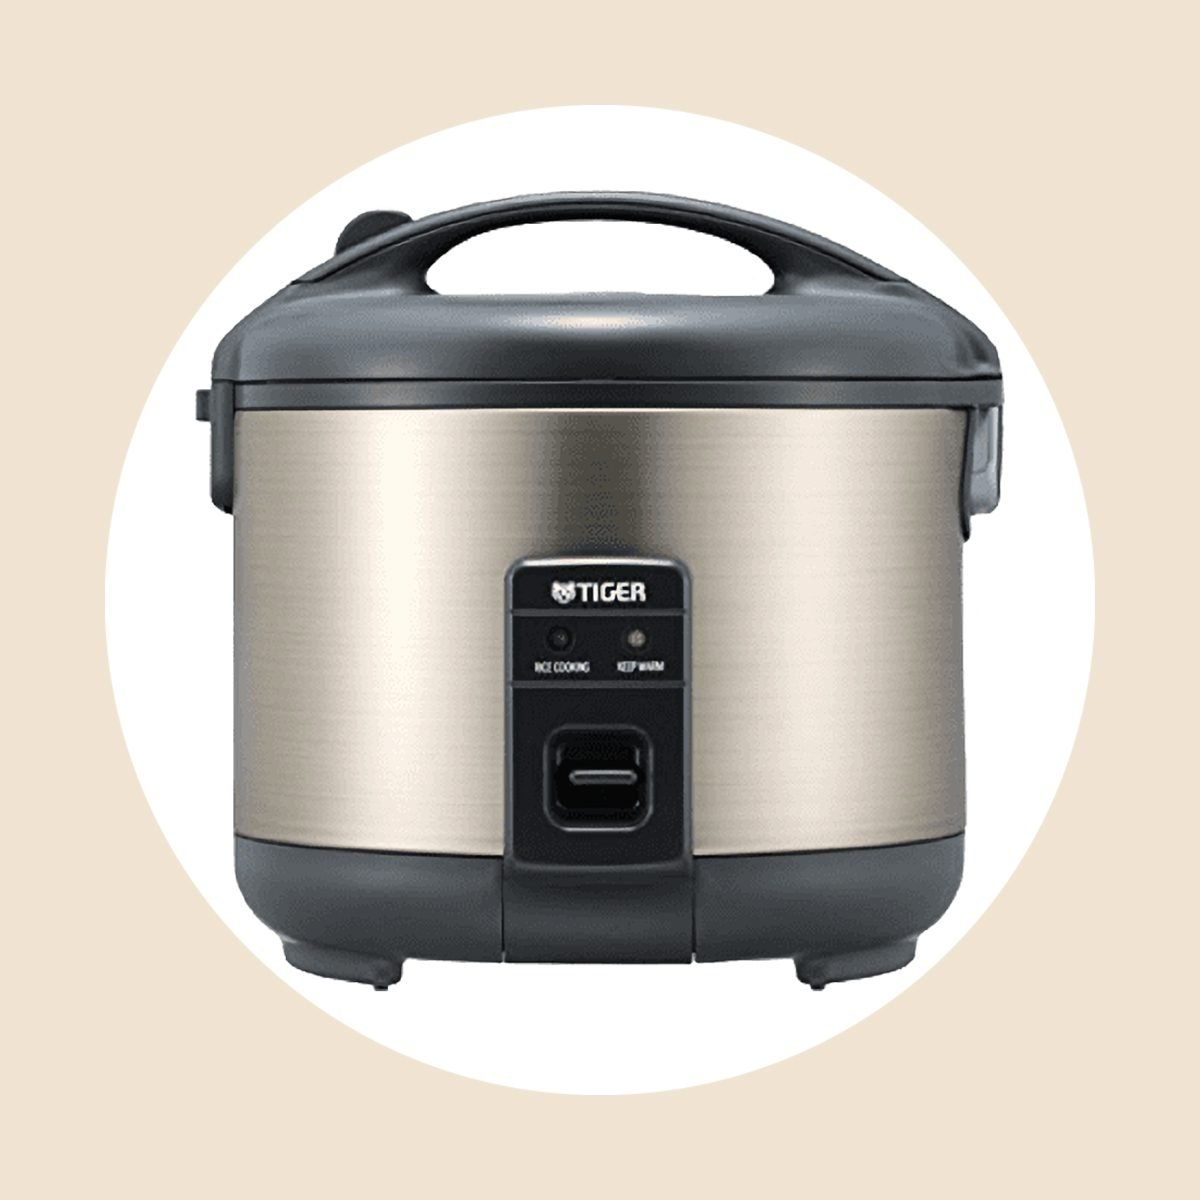 The Dash Mini Rice Cooker has a retro appeal & a low price of $17